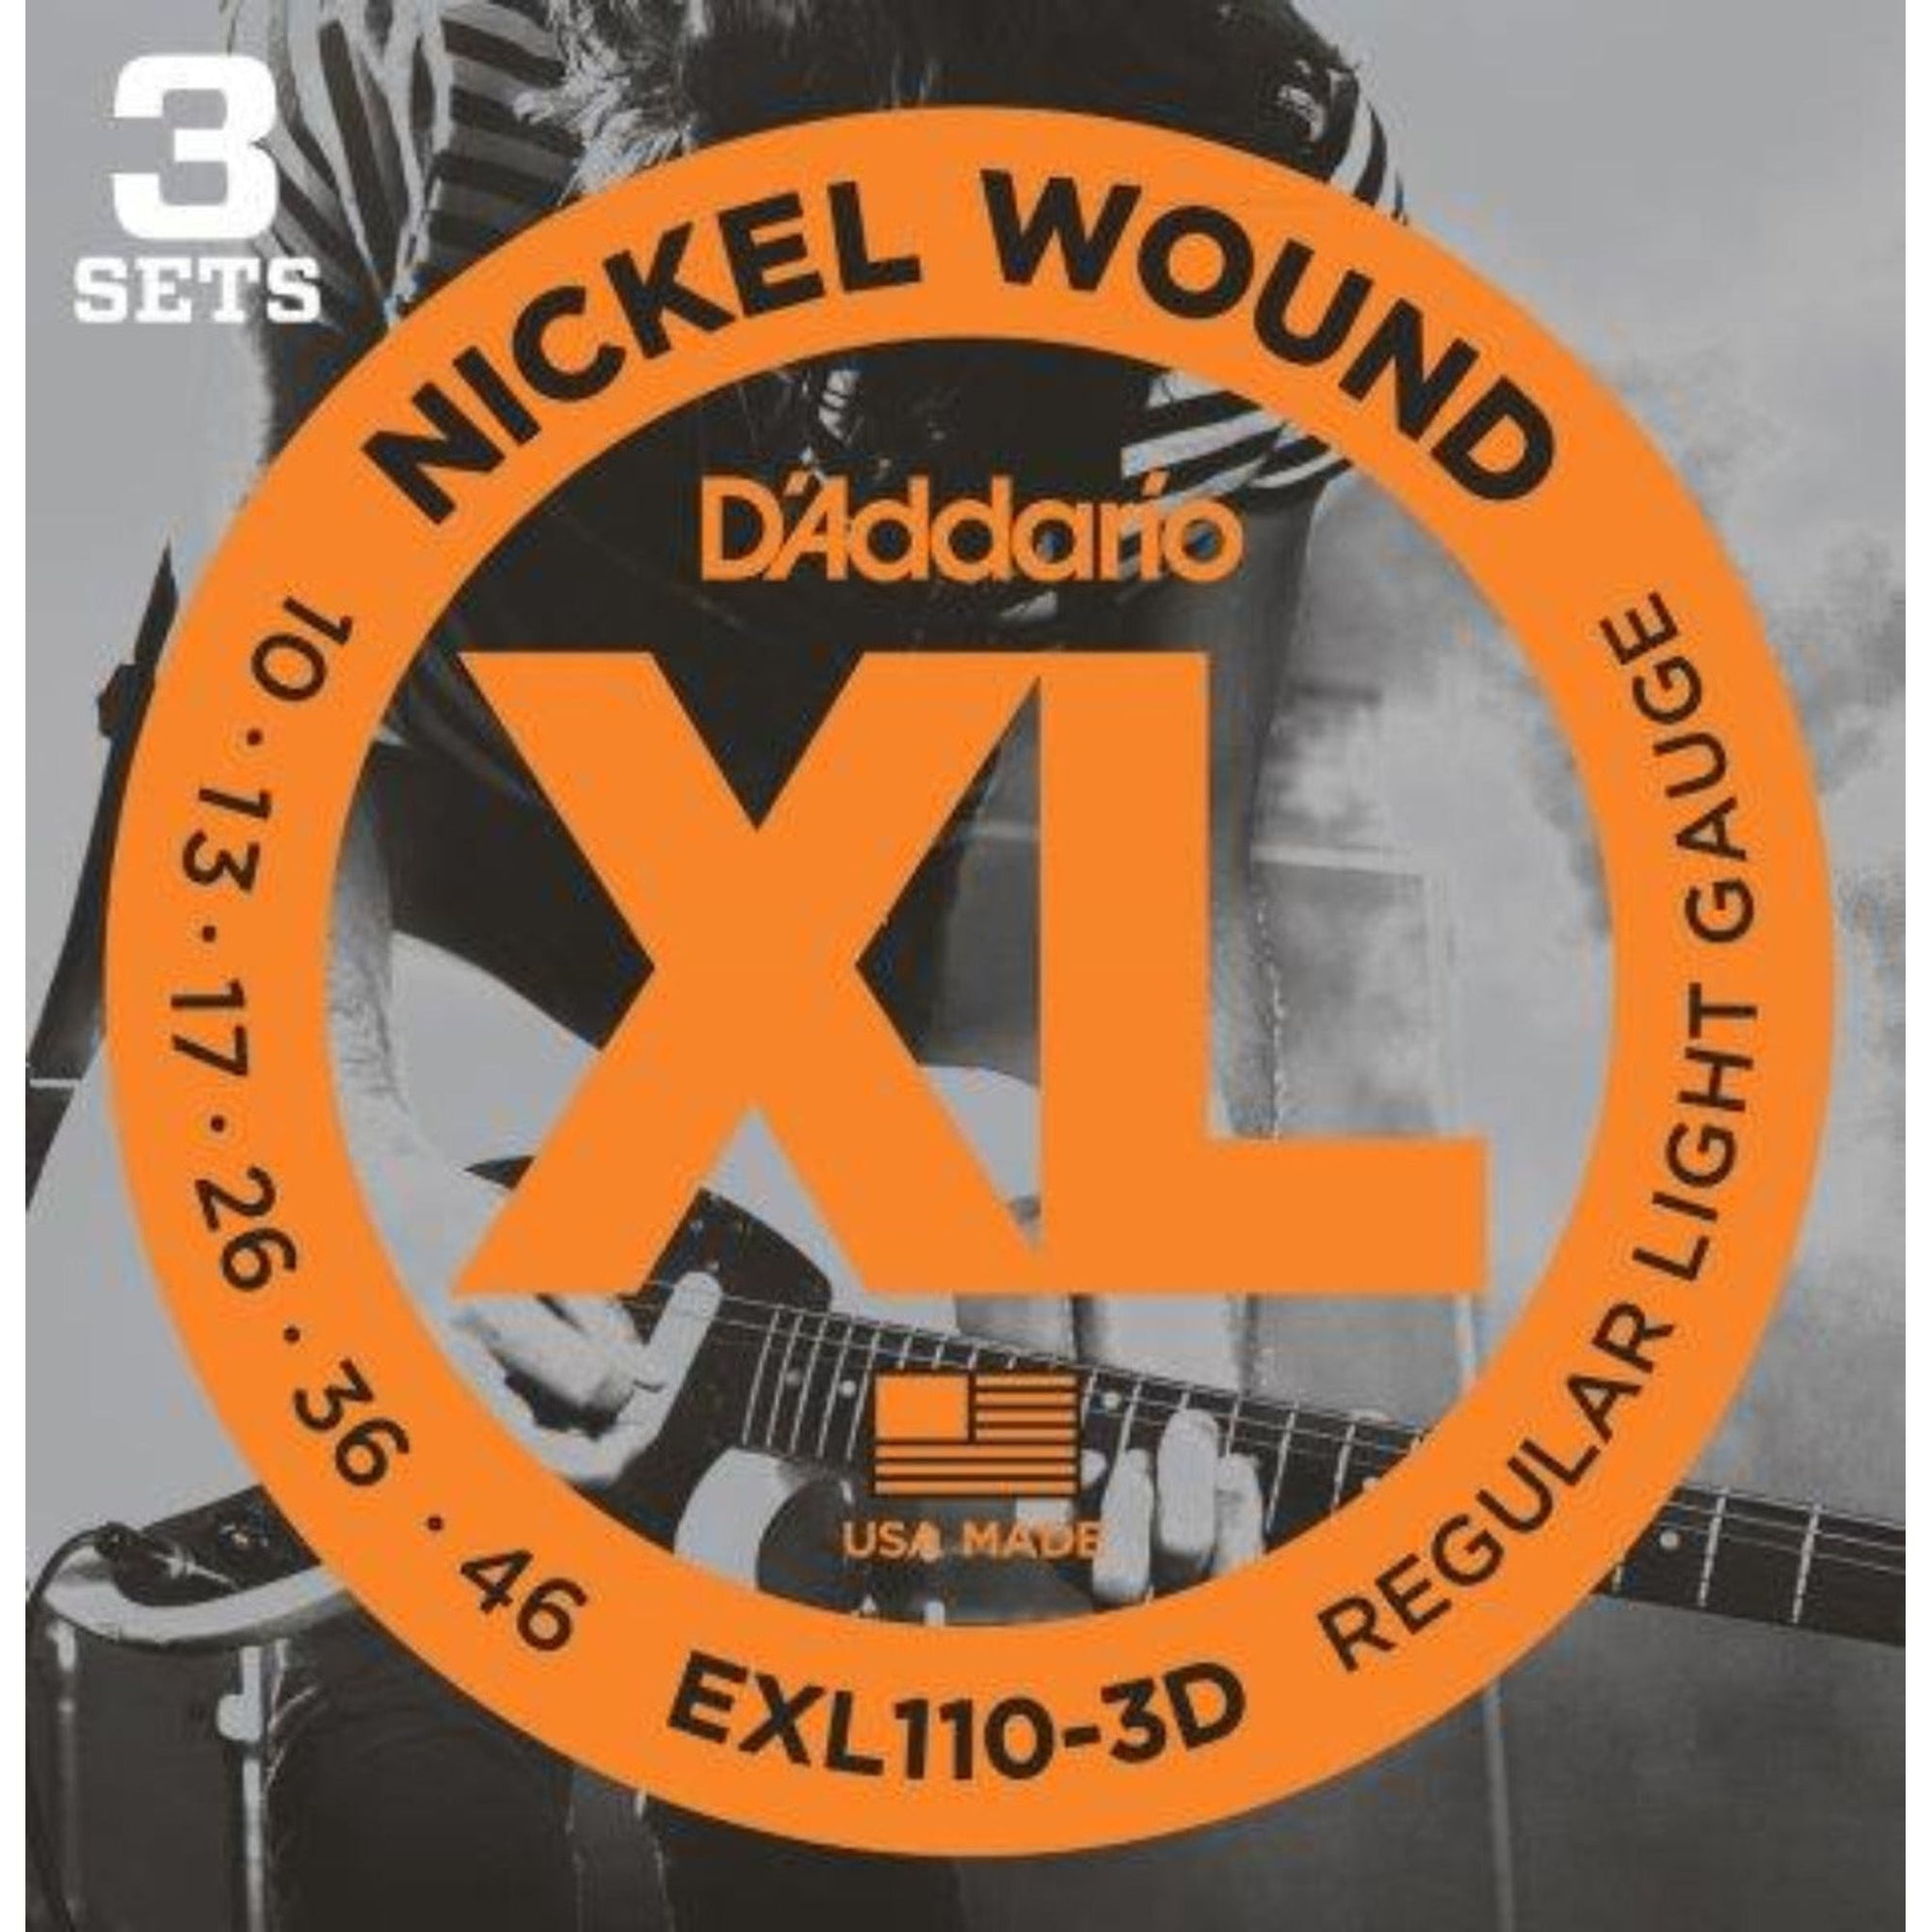 EXL110, D'Addario's best selling set, offers the ideal combination of tone, flexibility and long life. The standard for most electric guitars.